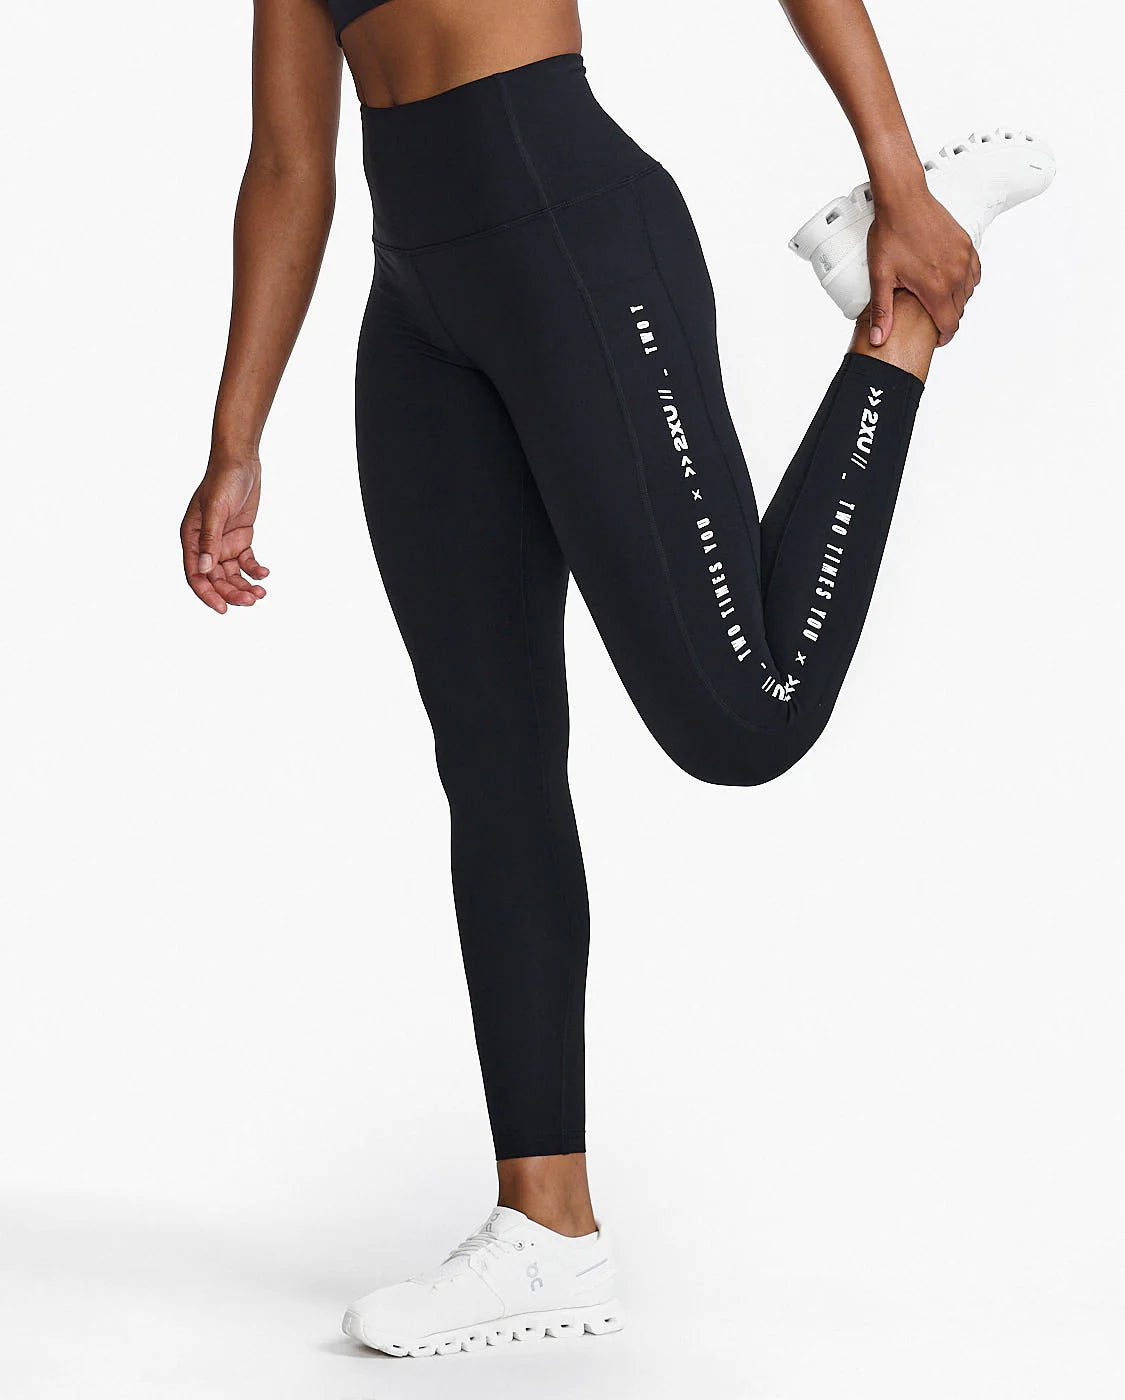 Authentic NEW 2XU Women Compression Tights - Variations